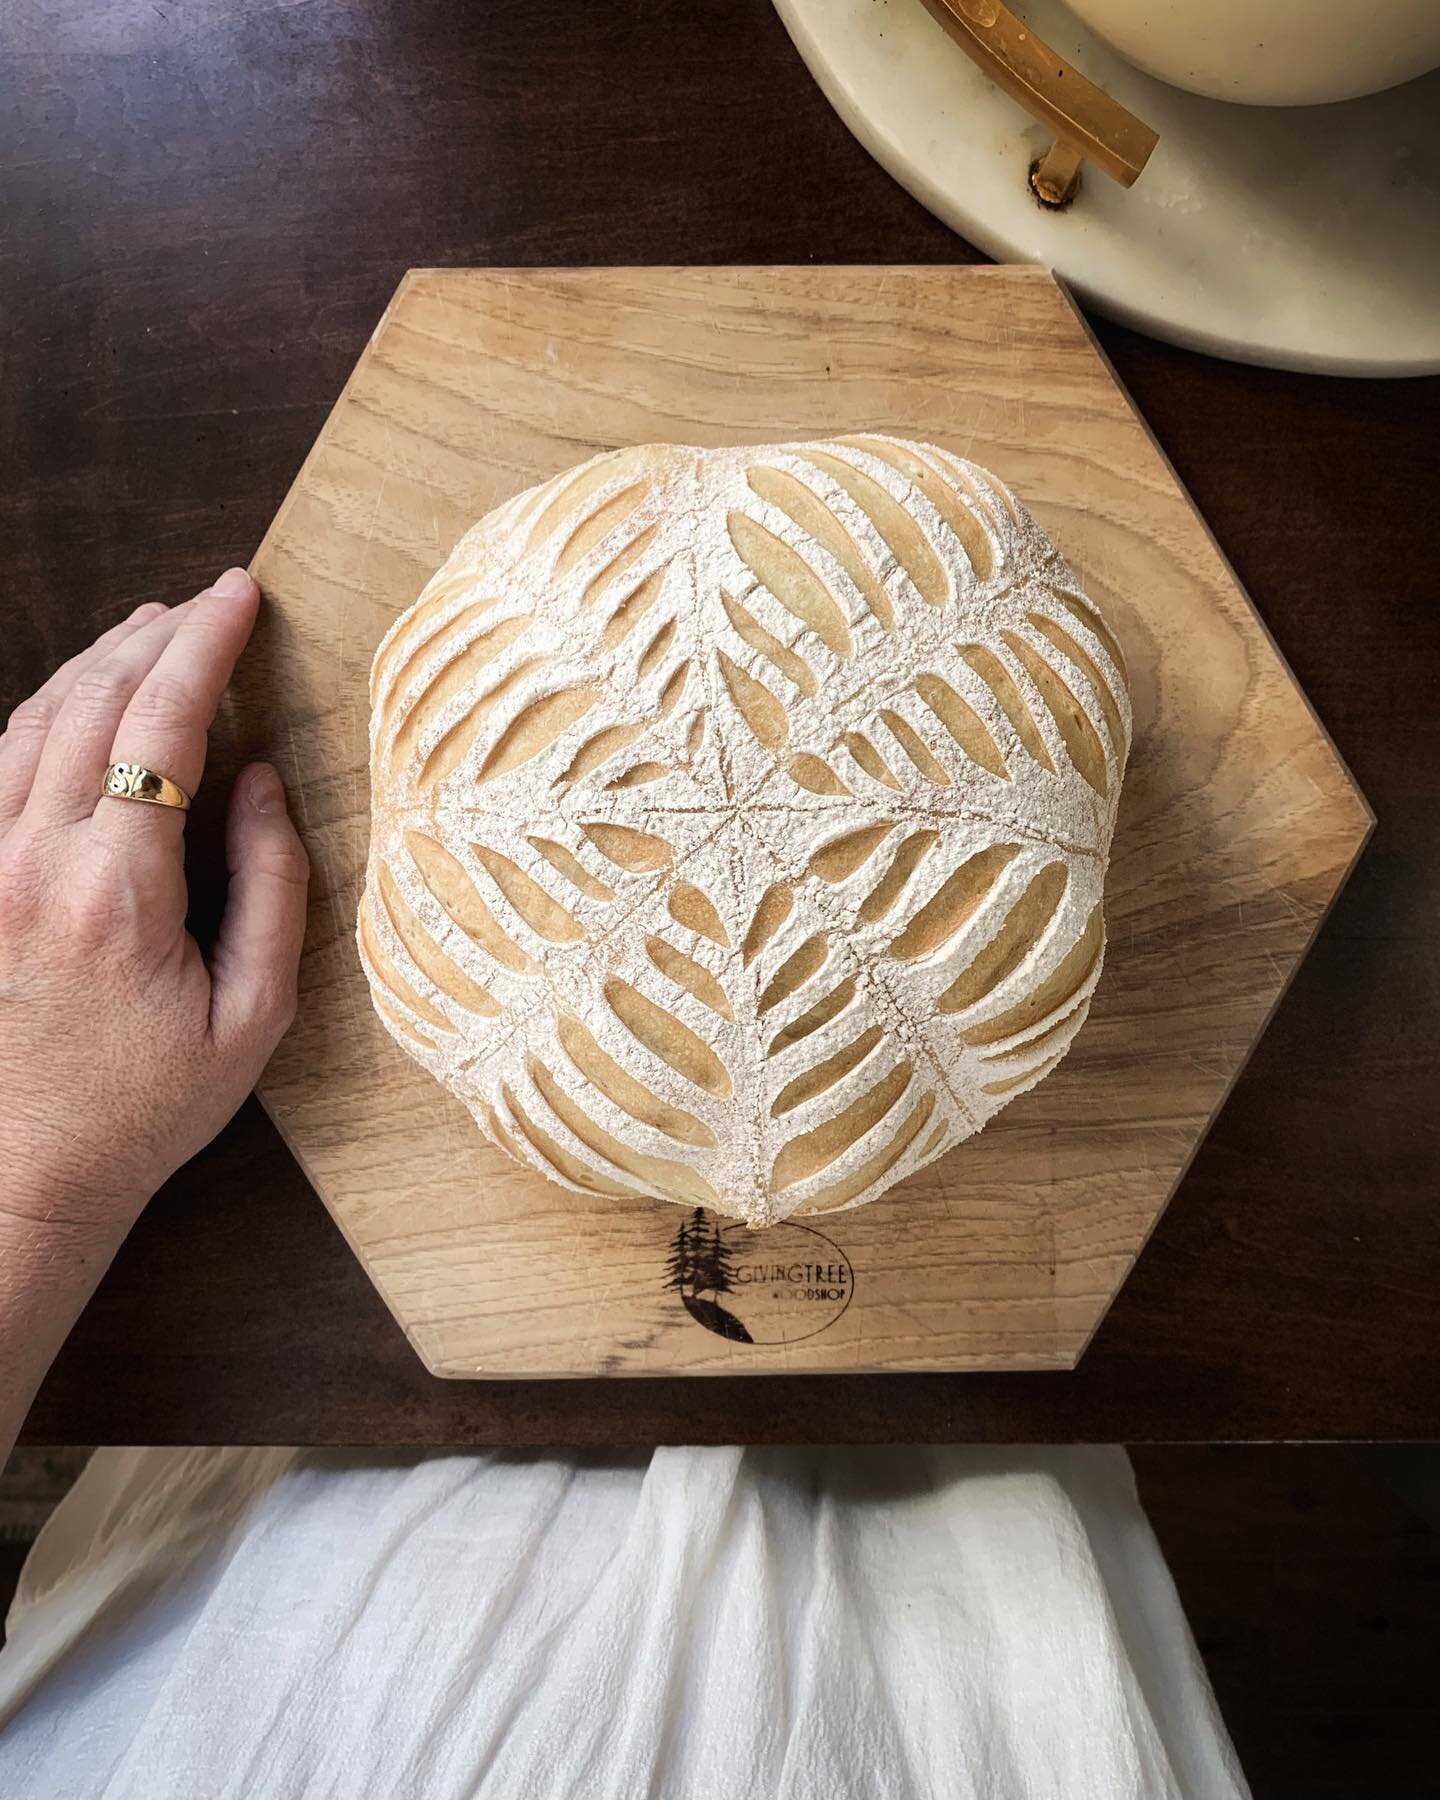 Can&rsquo;t decide if this looks leafy or skeletal. What do you think?
After a restorative post-holiday baking hiatus, I&rsquo;m feeling motivated again. I made some French toast this morning with the last few slices of yesterday&rsquo;s loaf. Highly